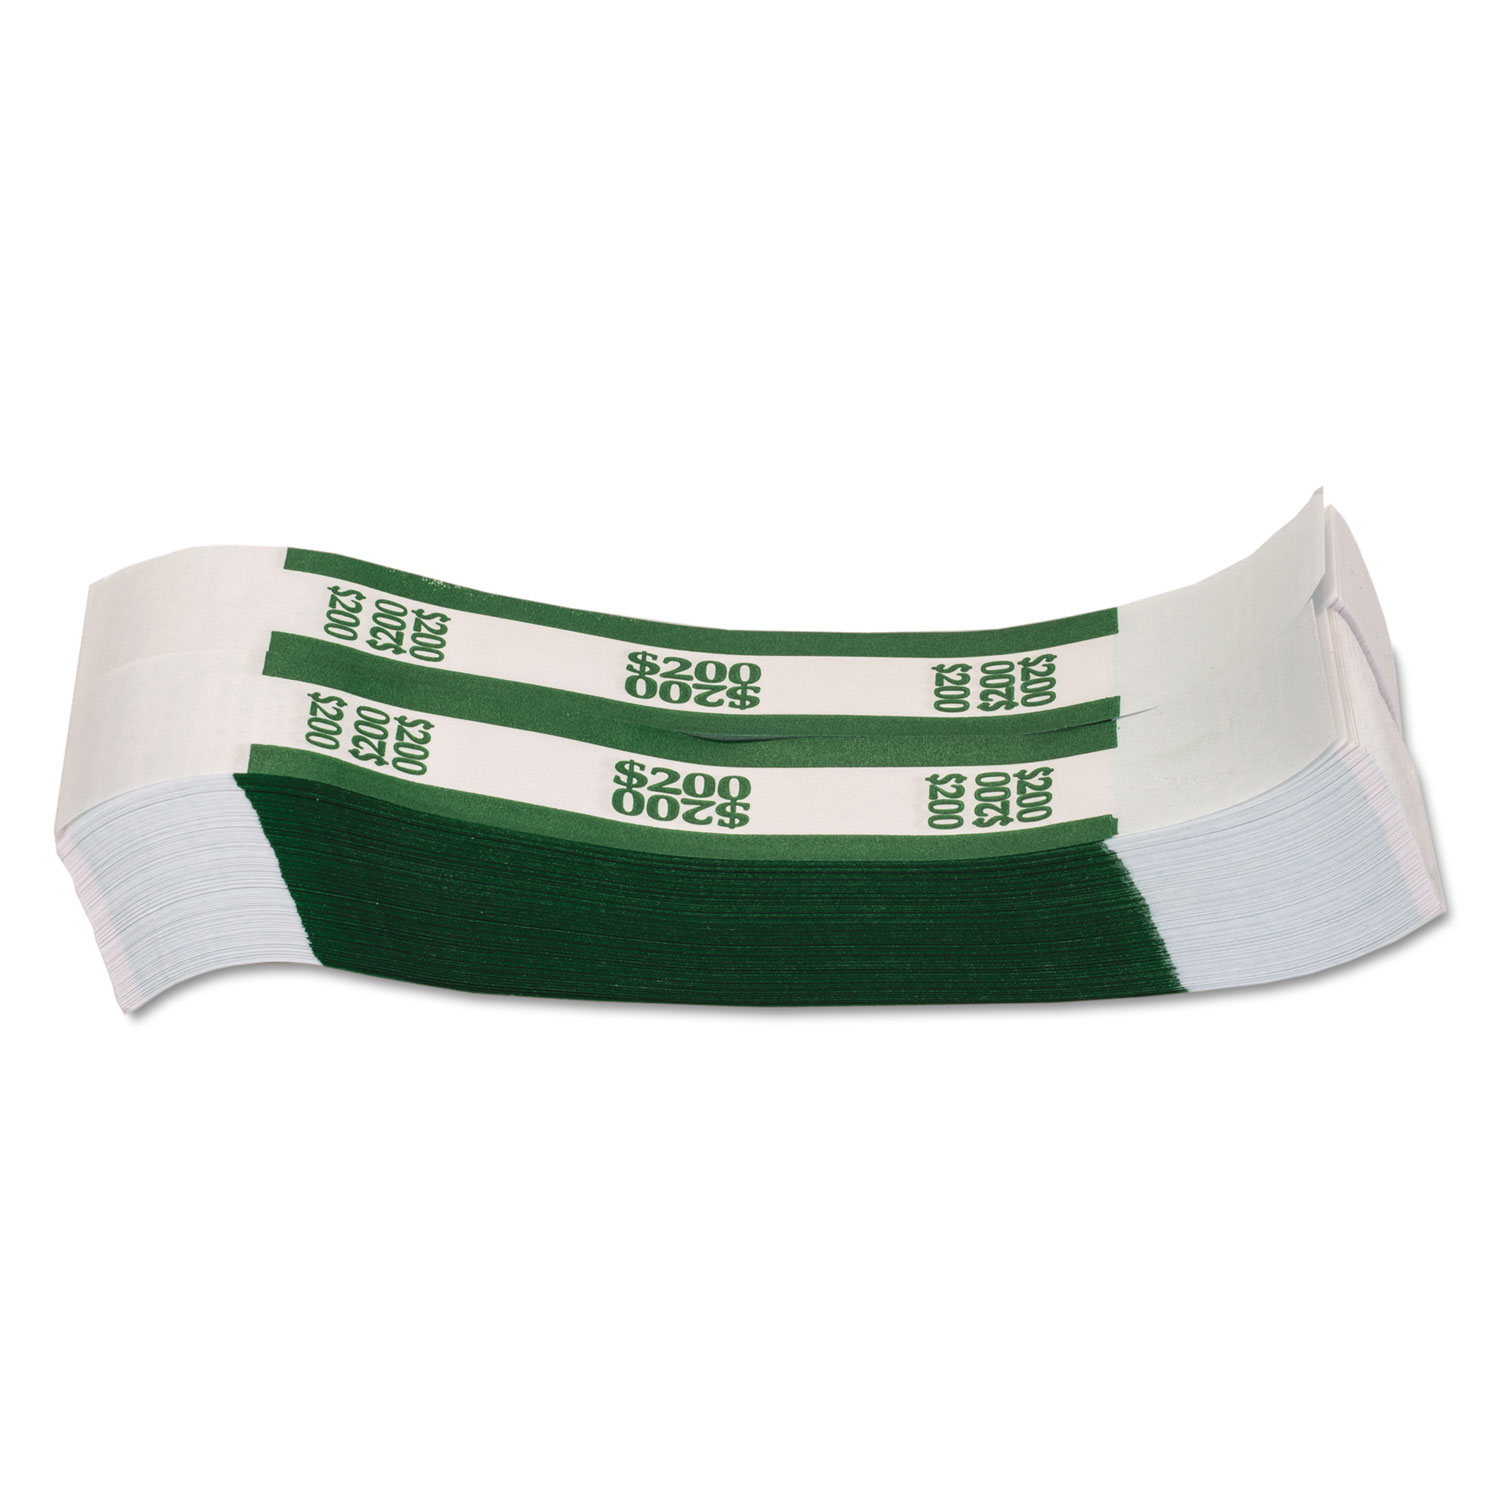  Pap-R Products 400200 Currency Straps, Green, $200 in Dollar Bills, 1000 Bands/Pack (CTX400200) 